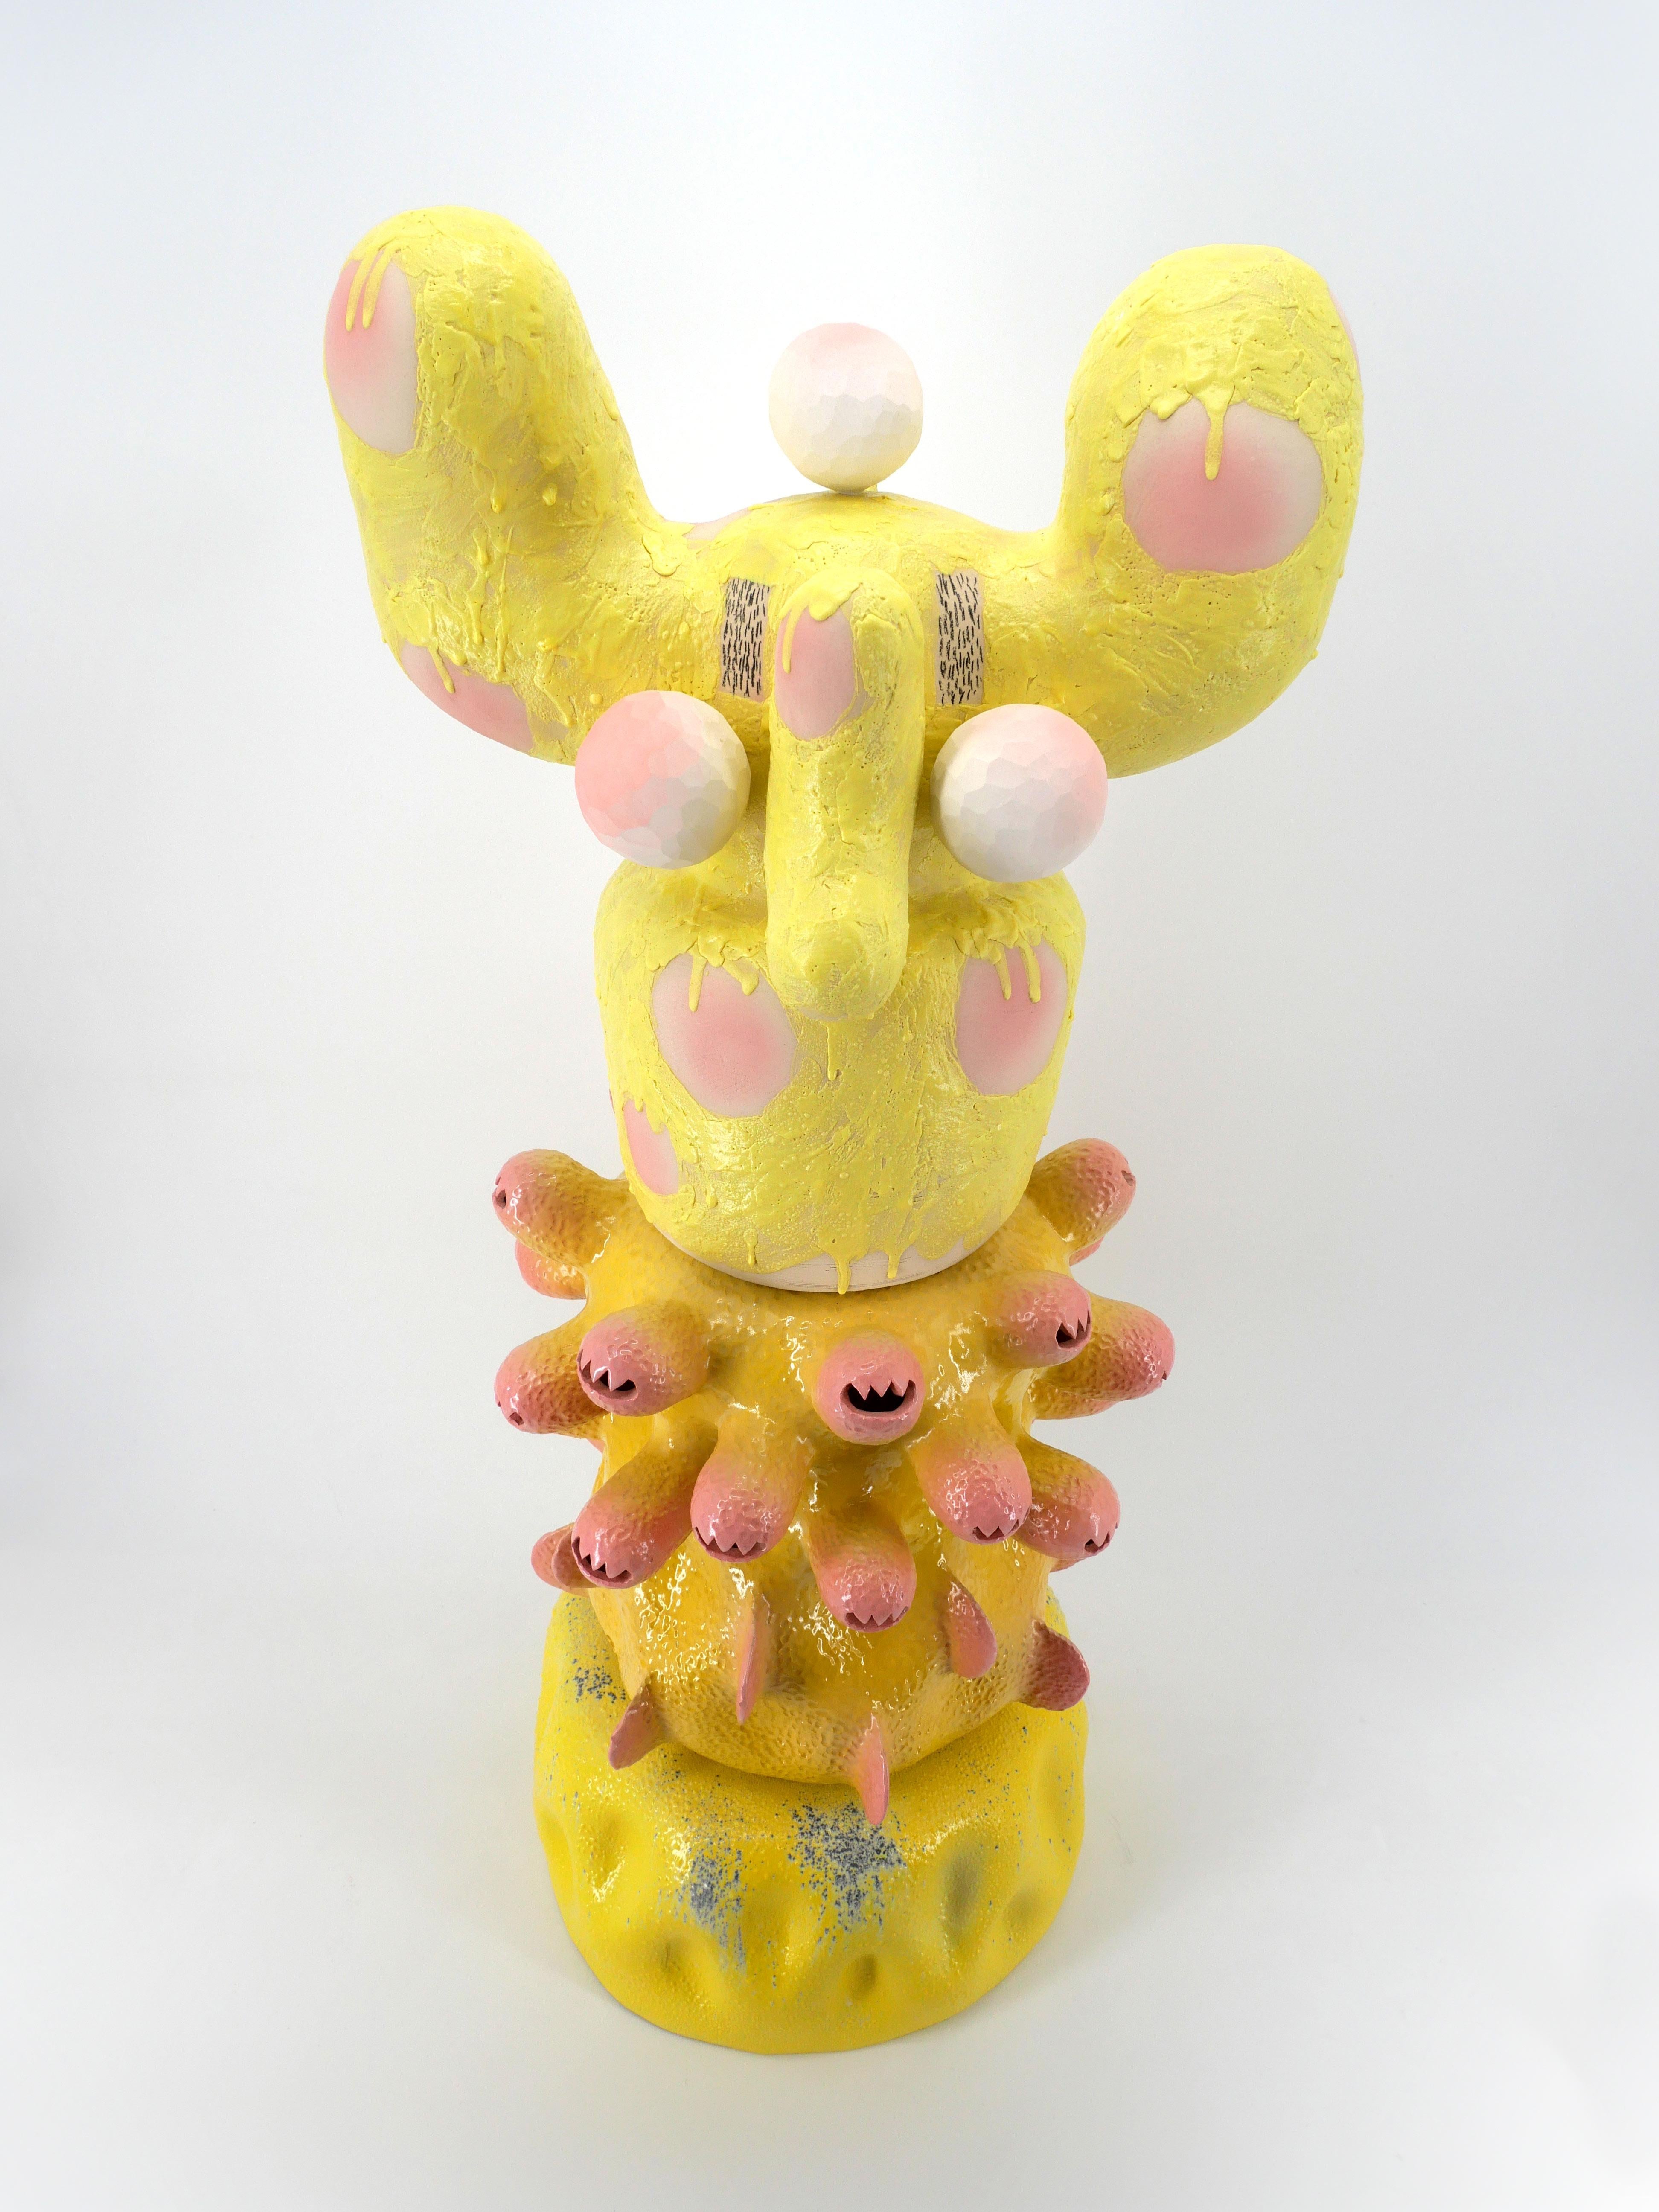 French 'Banana Eats You' Playful Monster Ceramic Decorative Sculpture by Kartini Thomas For Sale